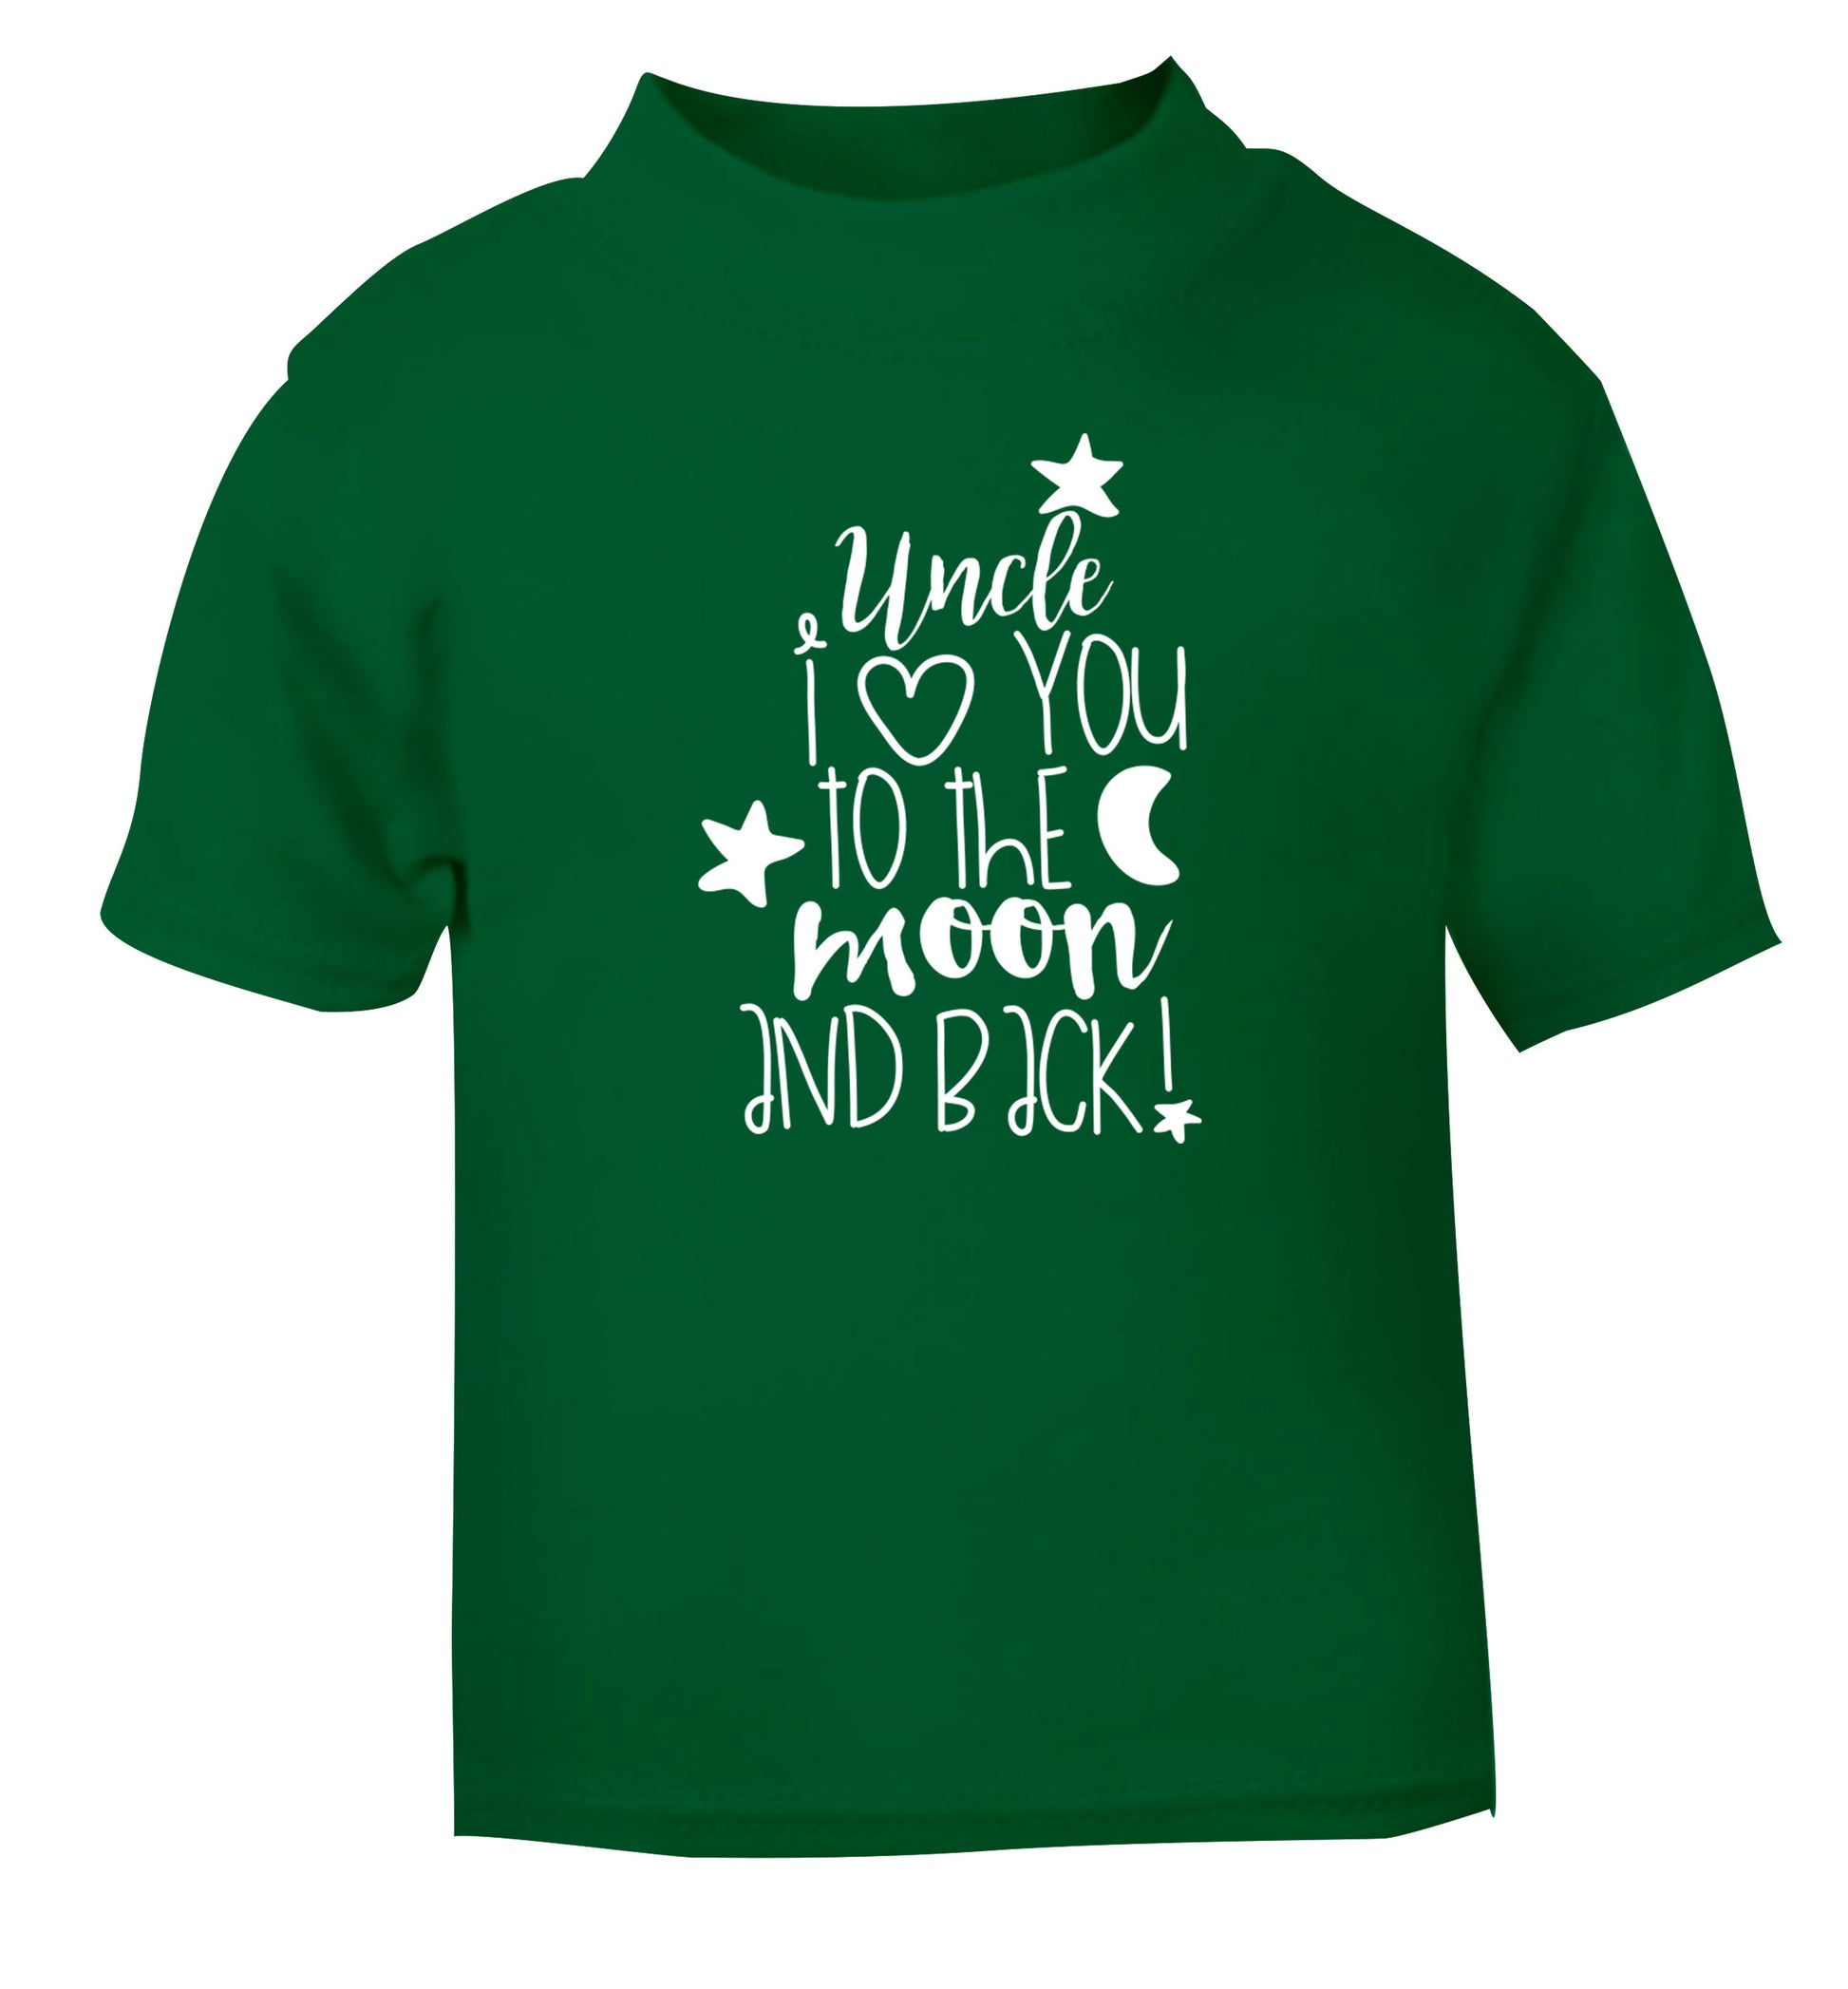 Uncle I love you to the moon and back green Baby Toddler Tshirt 2 Years